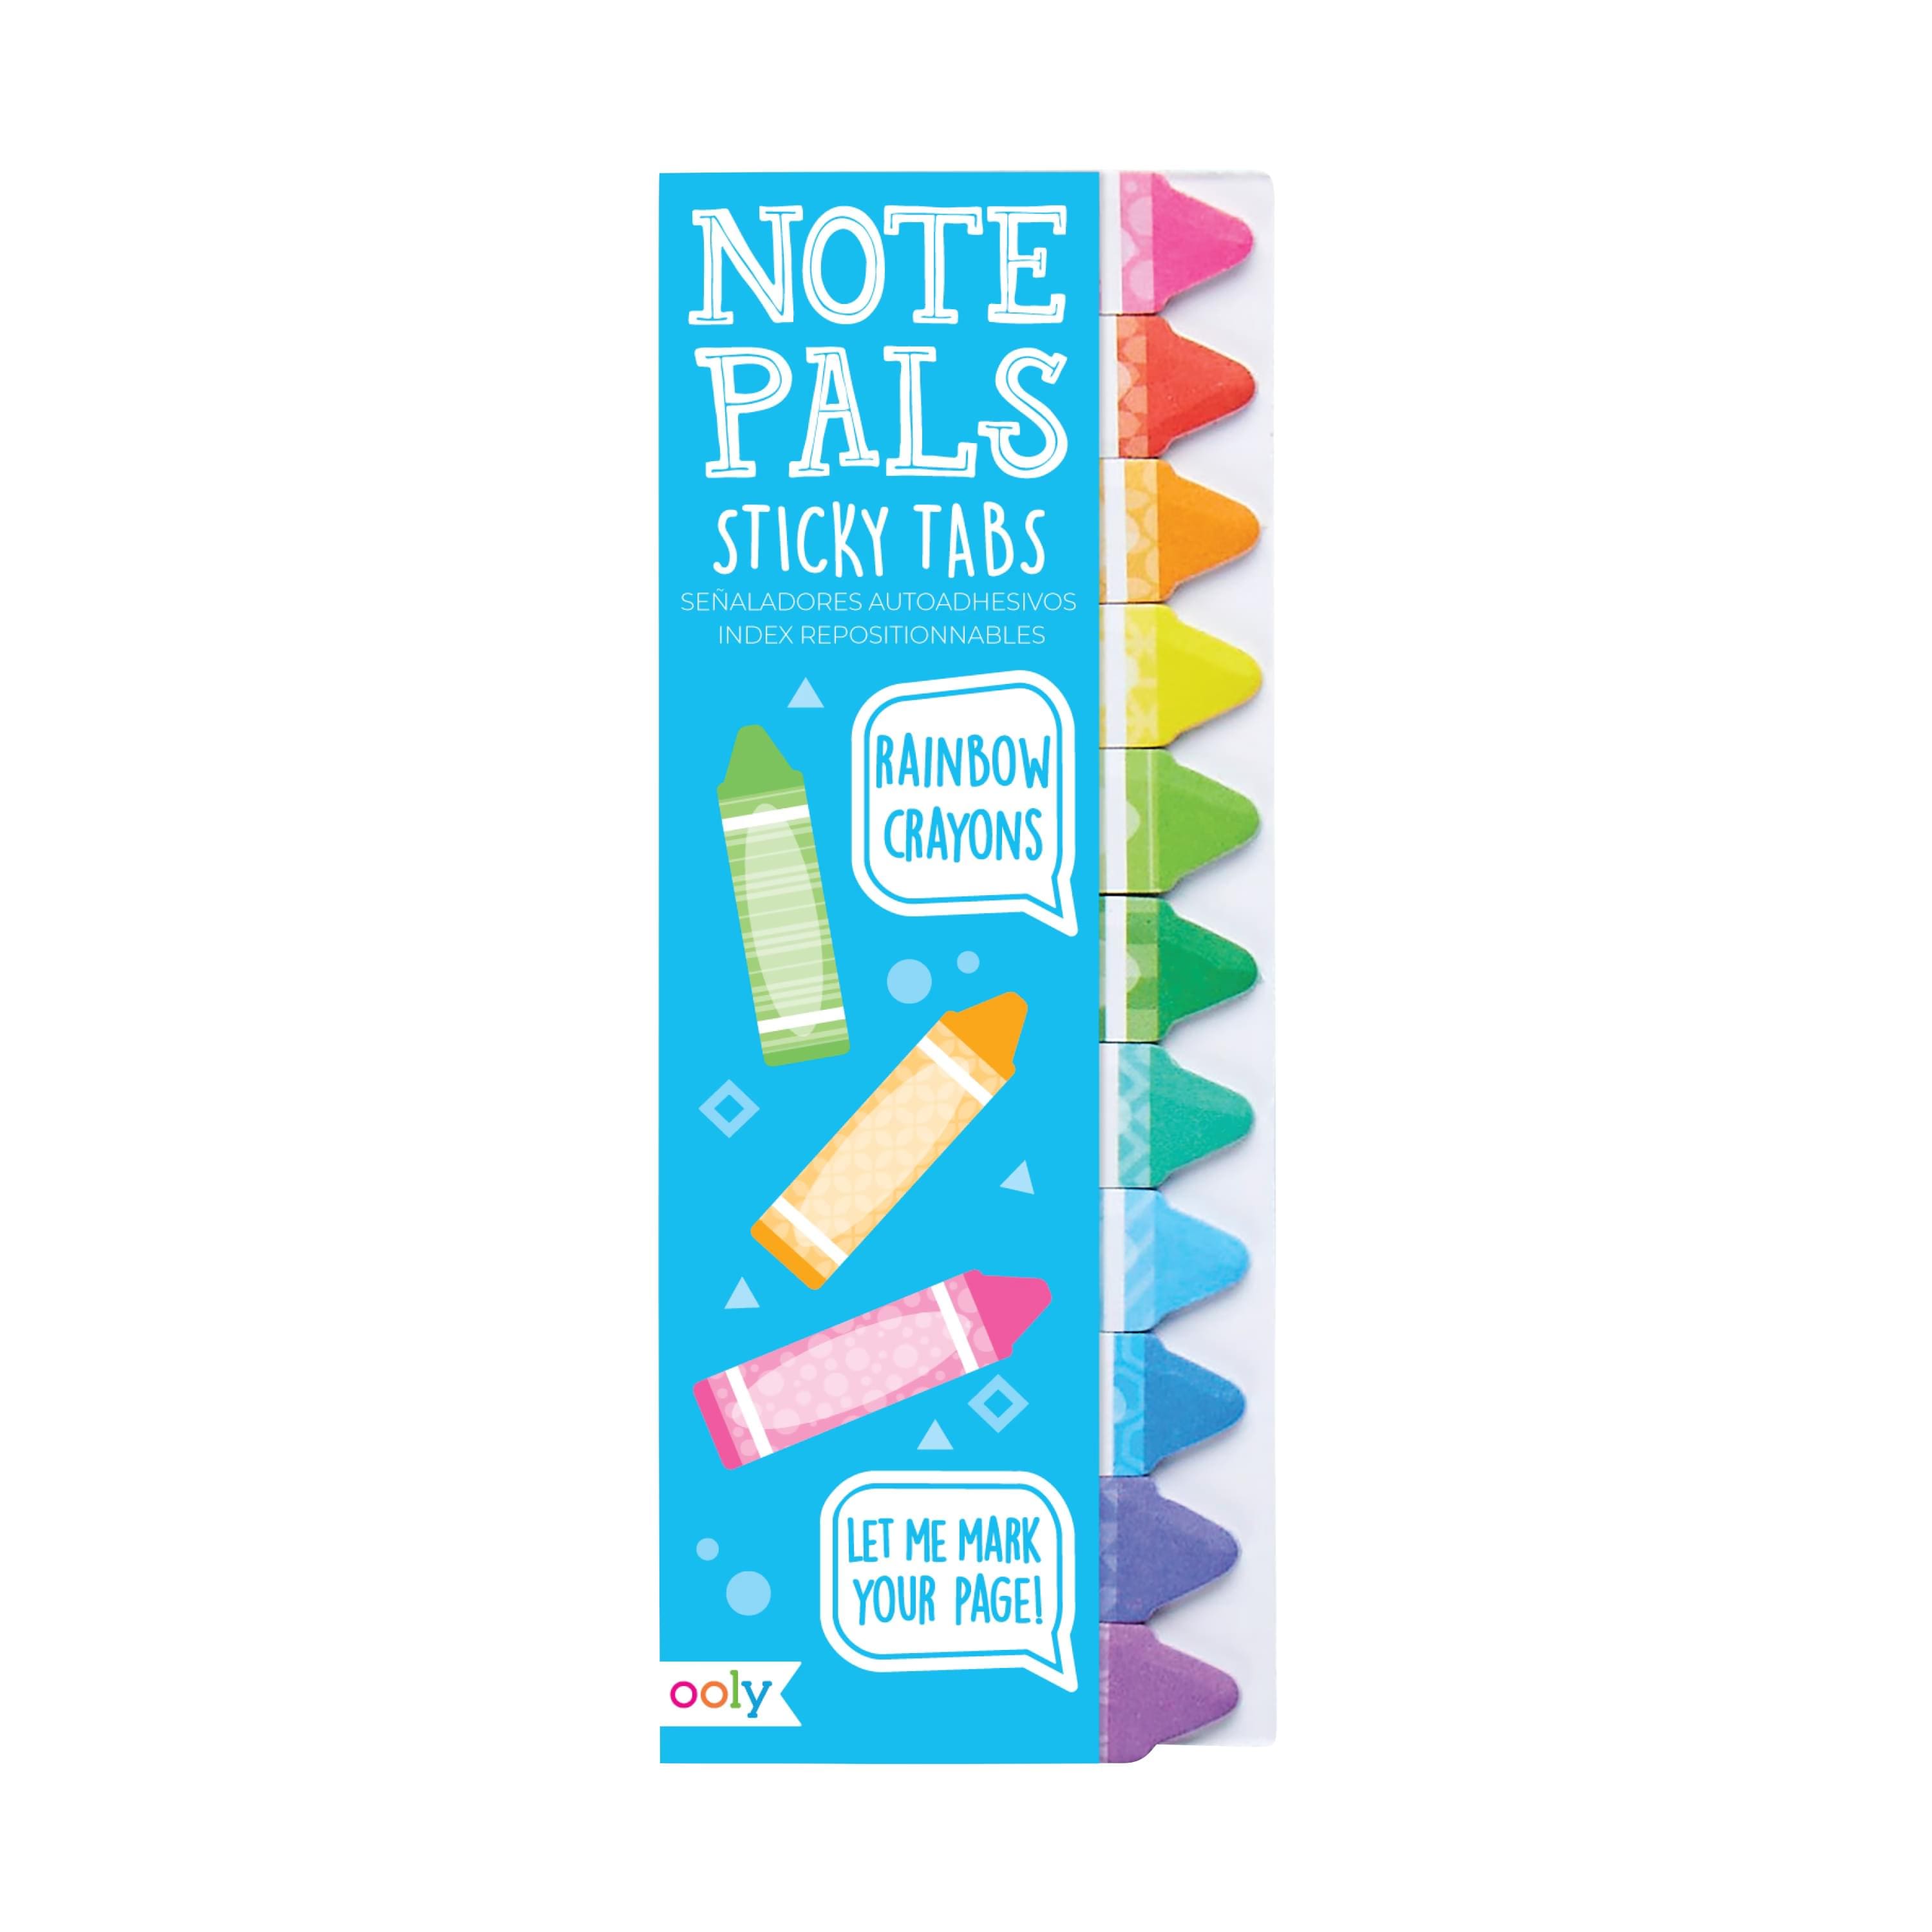 OOLY Note Pals Rainbow Crayons Sticky Tabs